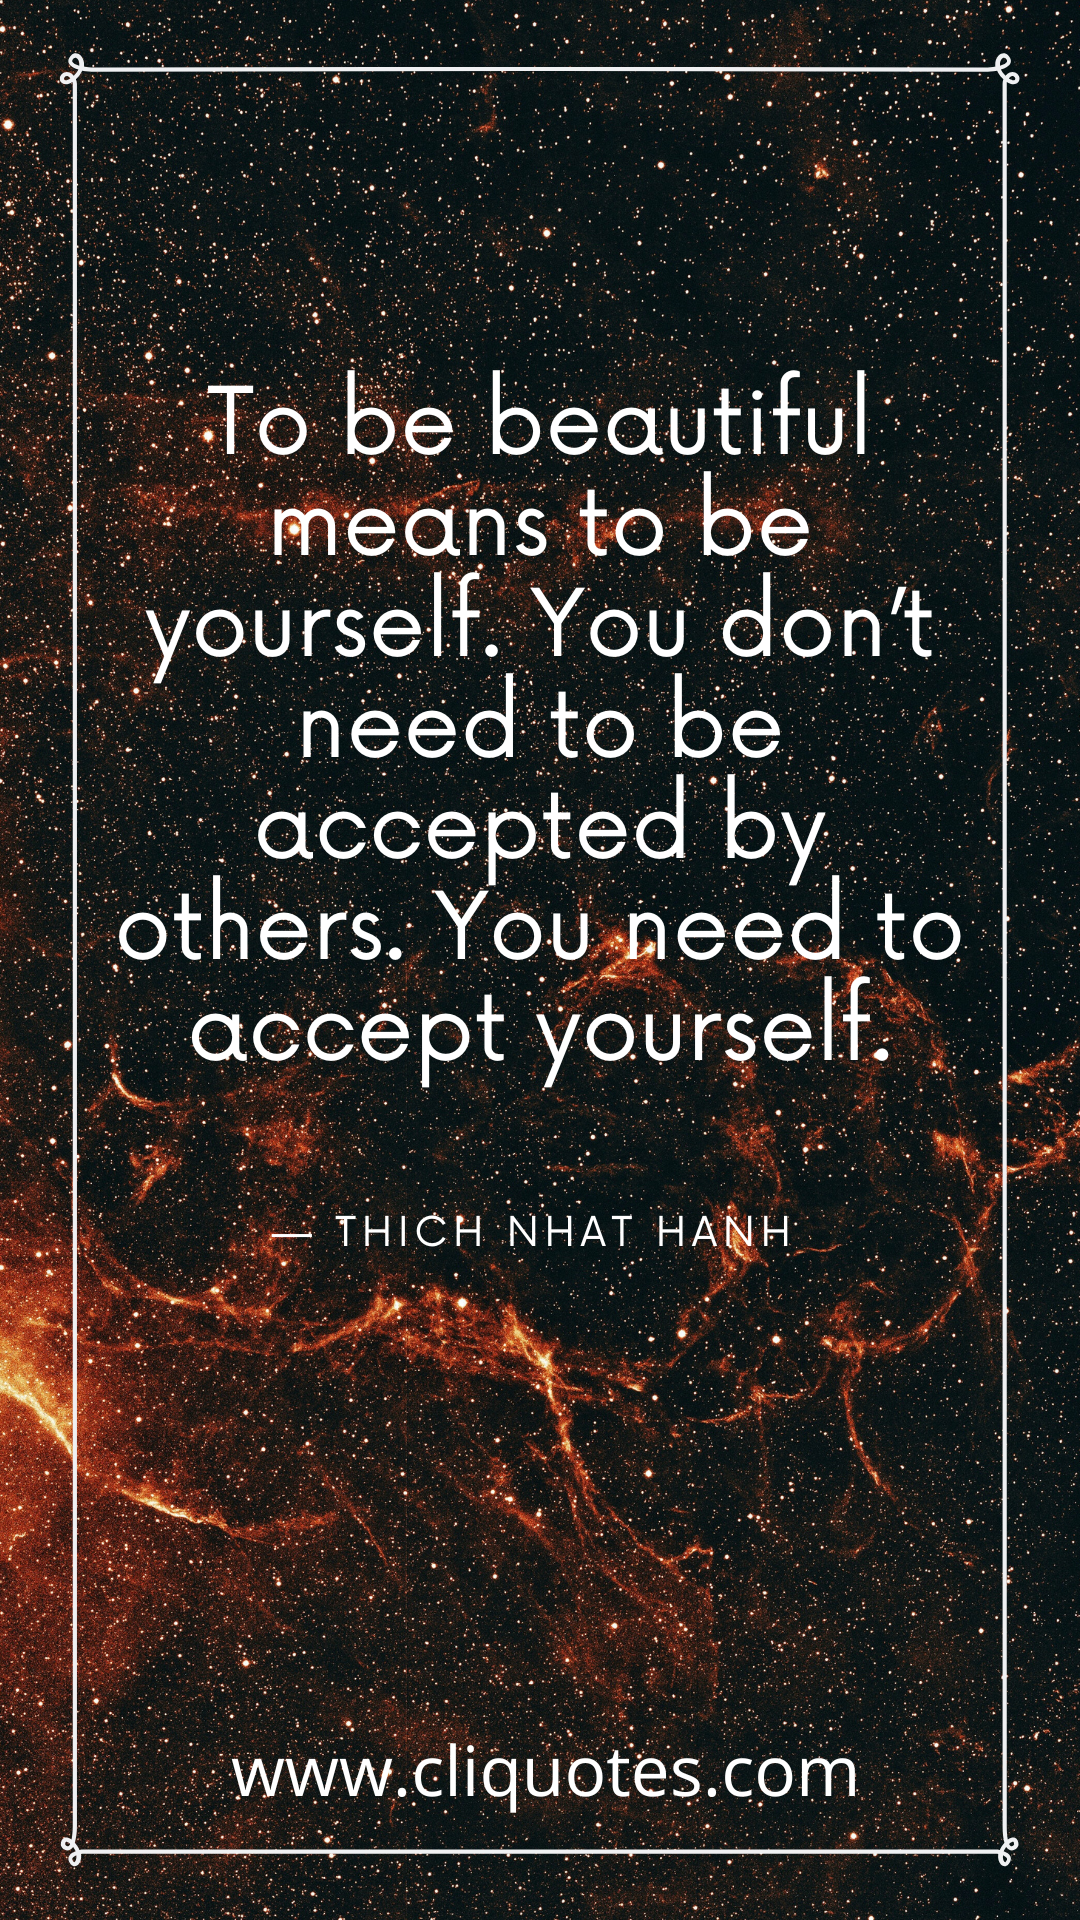 To be beautiful means to be yourself. You don’t need to be accepted by others. You need to accept yourself. — THICH NHAT HANH